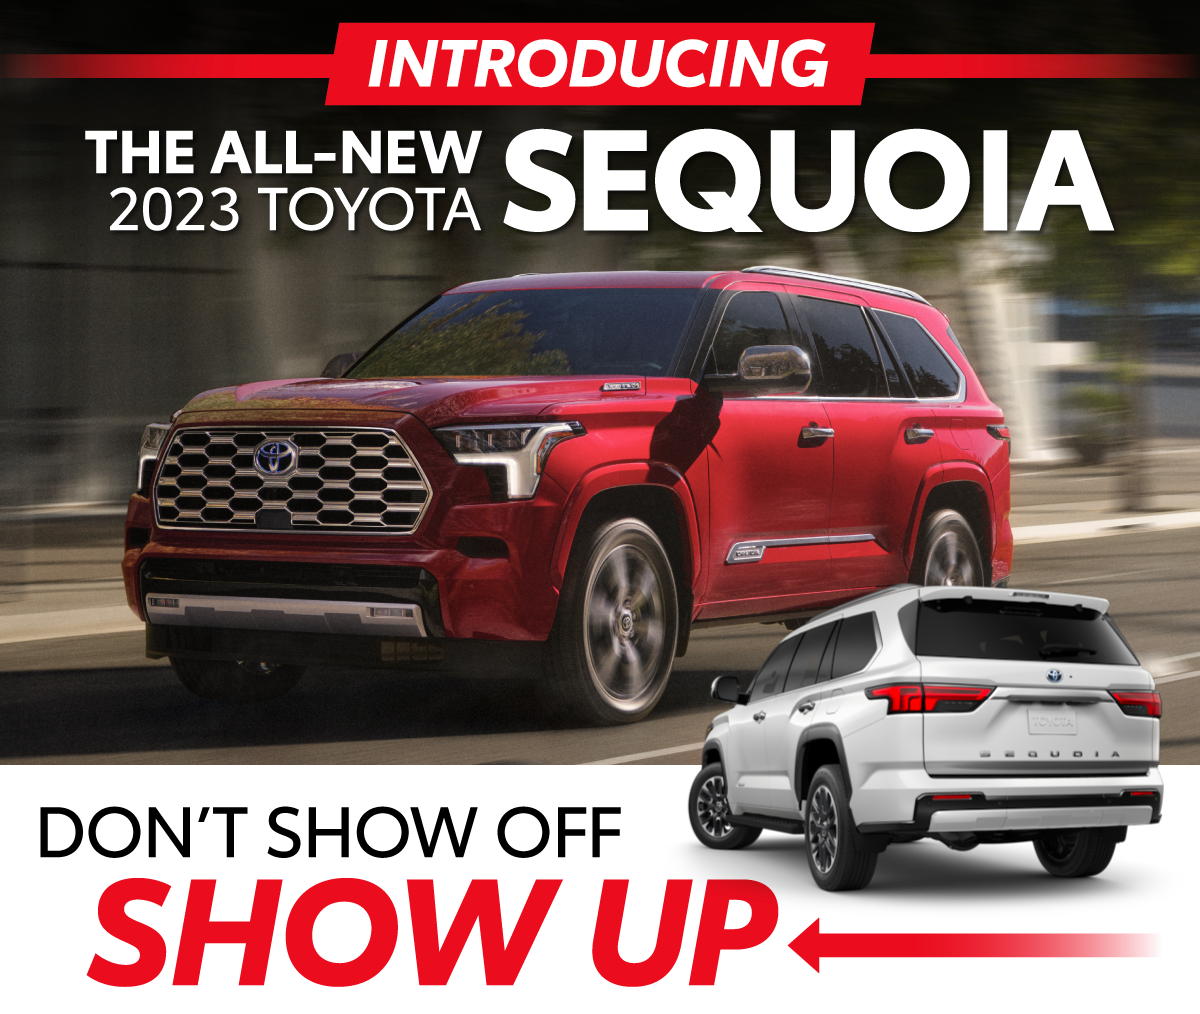 Introducing the ALl-New 2023 Toyota Sequoia at Thomasville Toyota - Don't Show Off, SHOW UP